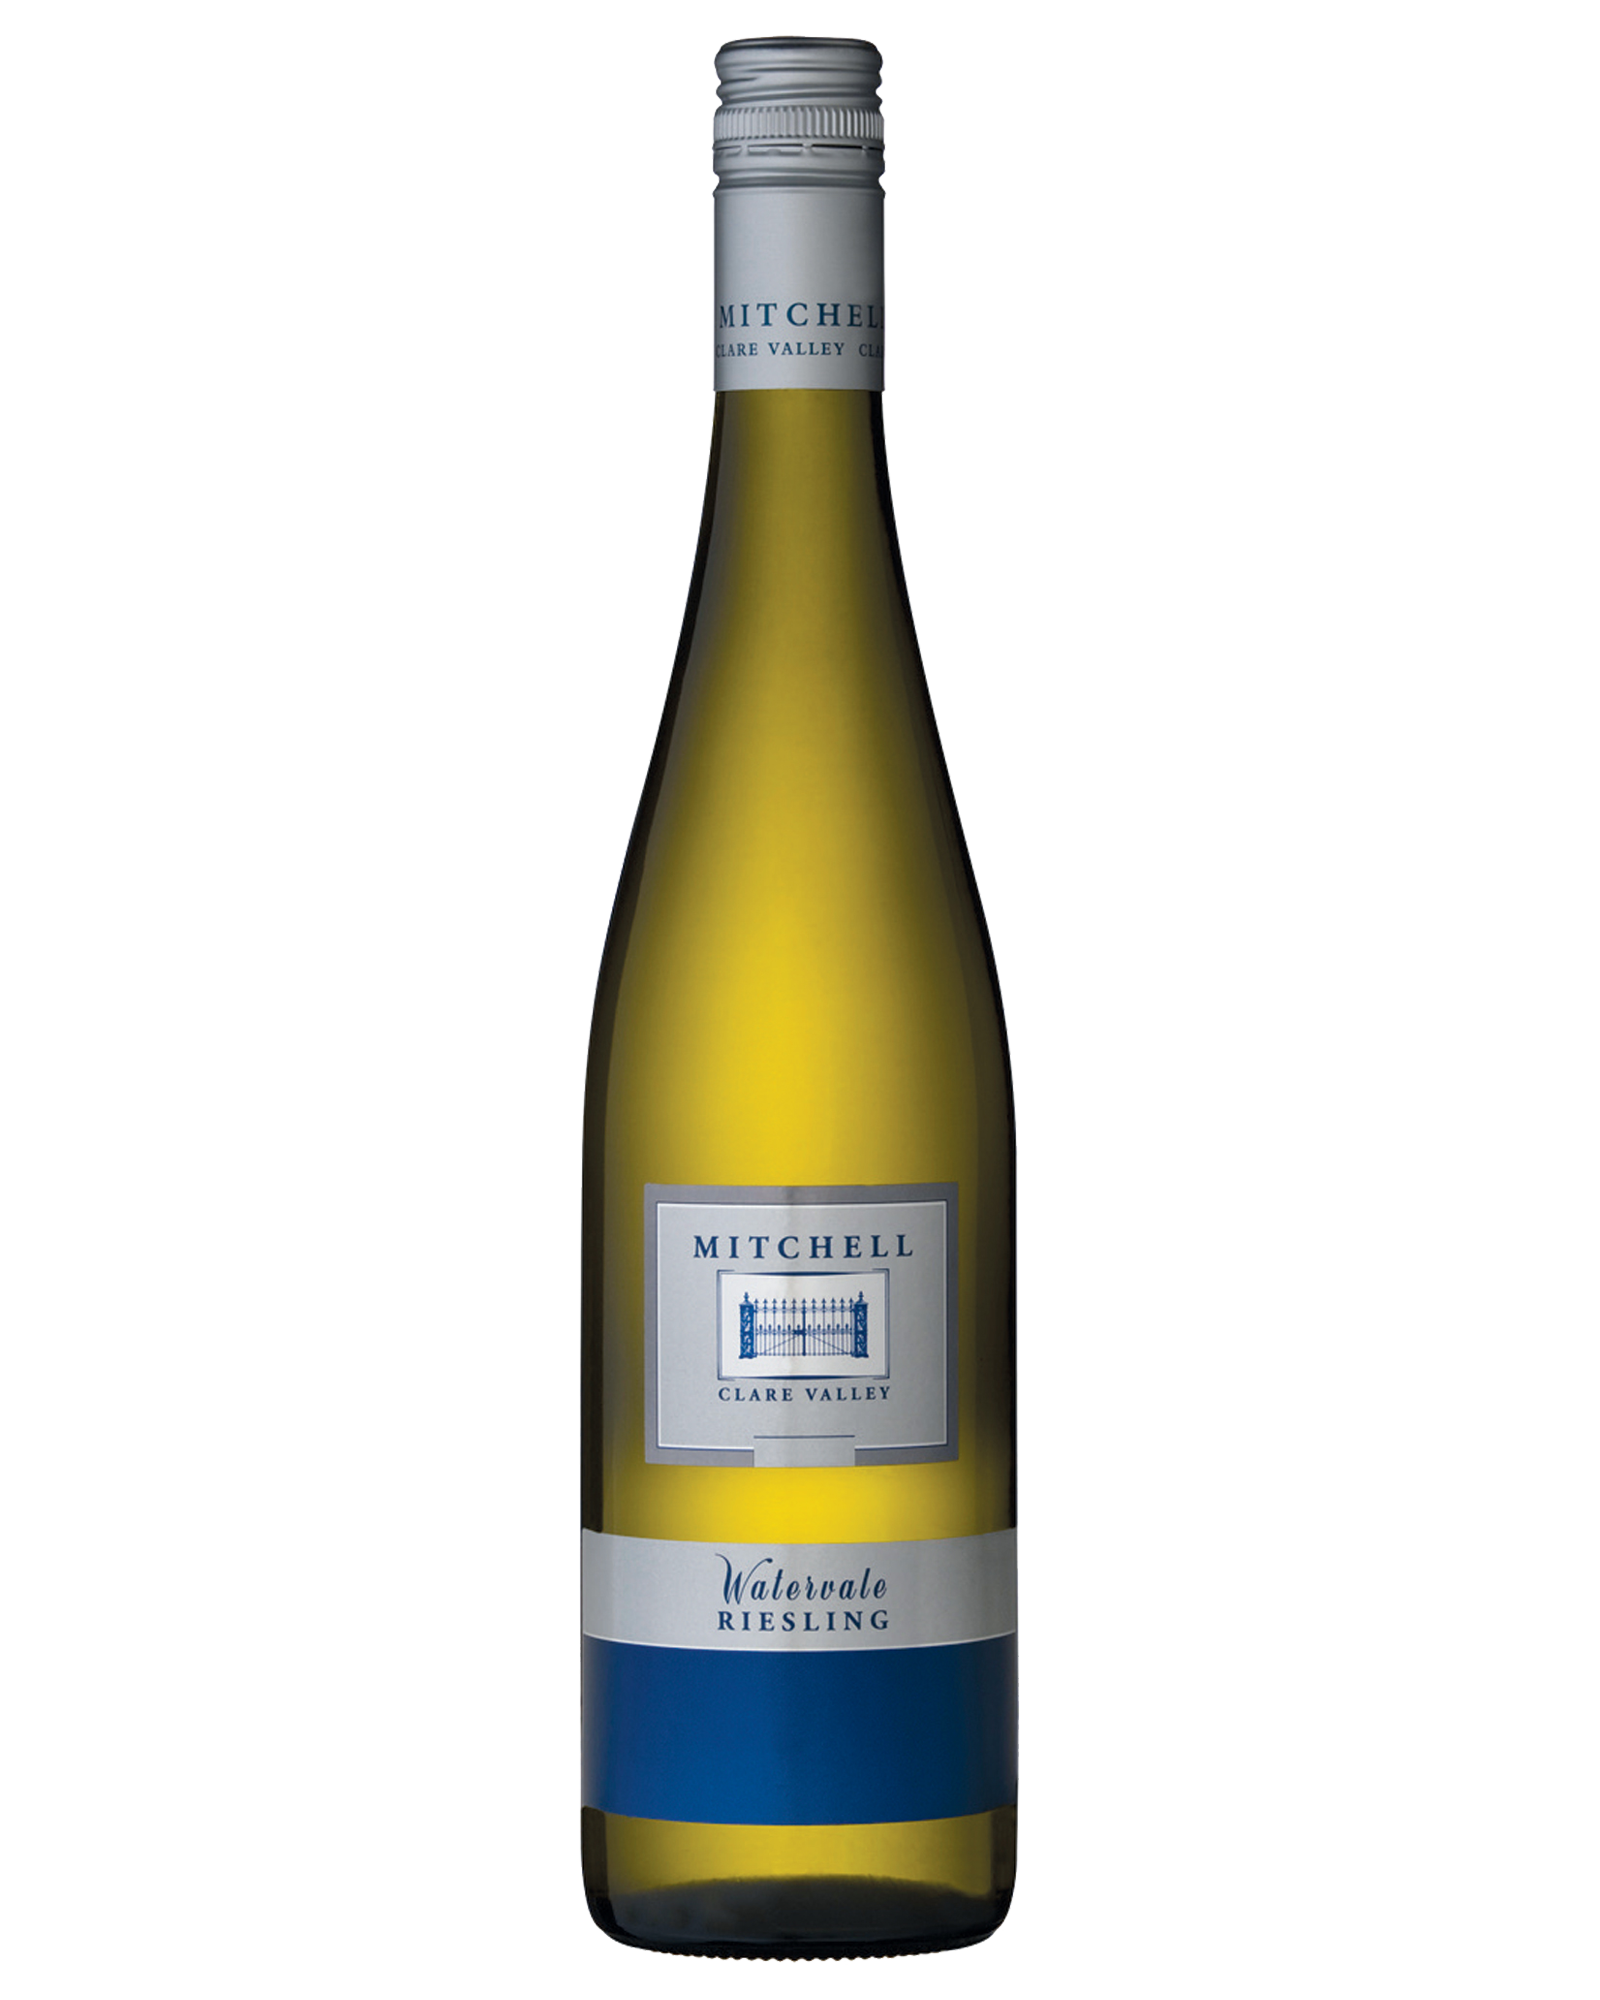 Mitchell Clare Valley Riesling